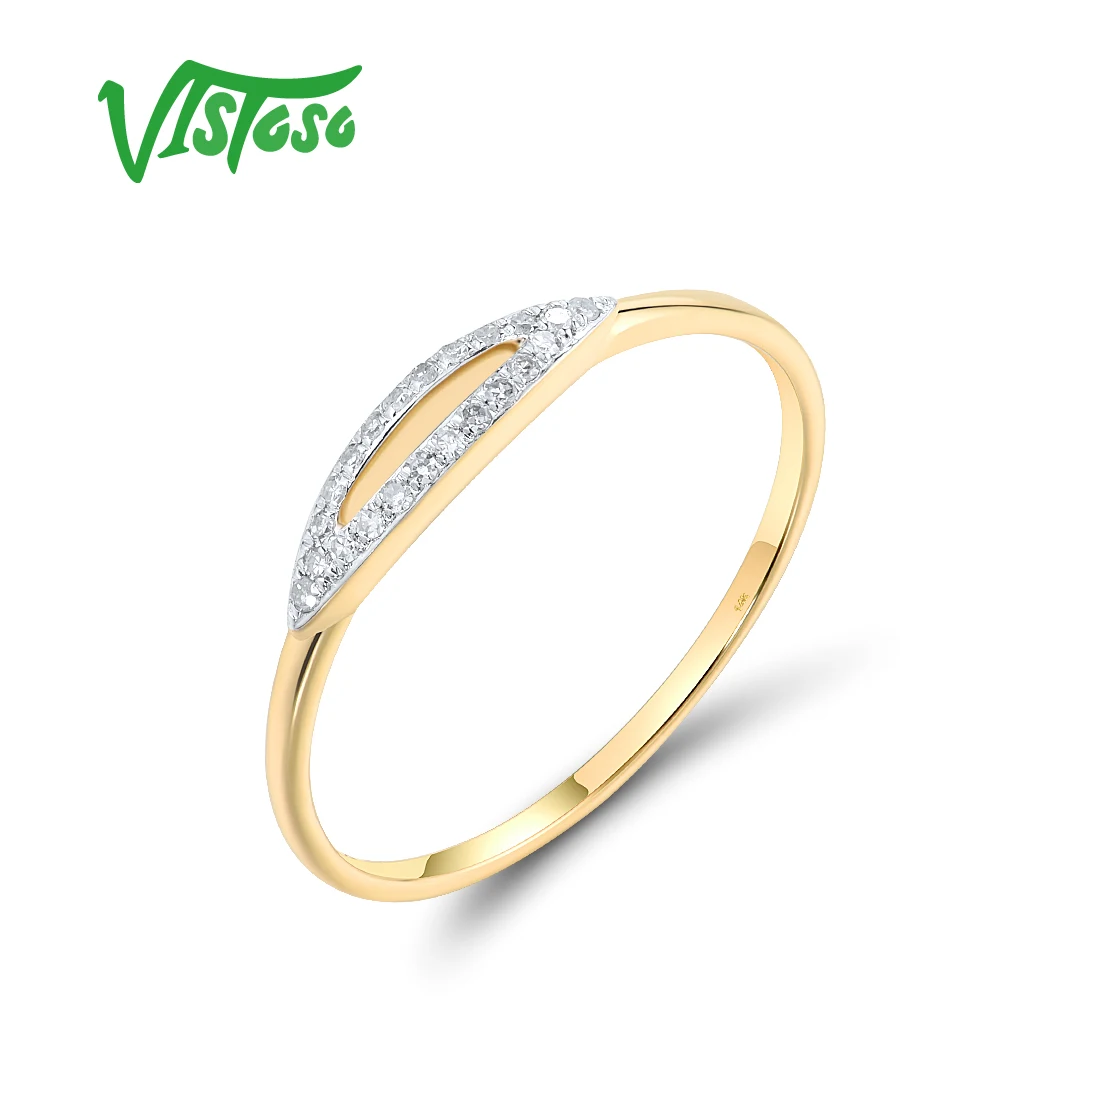 

VISTOSO Pure 14K 585 Yellow Gold Rings For Women Sparkling Diamonds Dainty Marquise Wedding Stackable Daily Wear Fine Jewelry